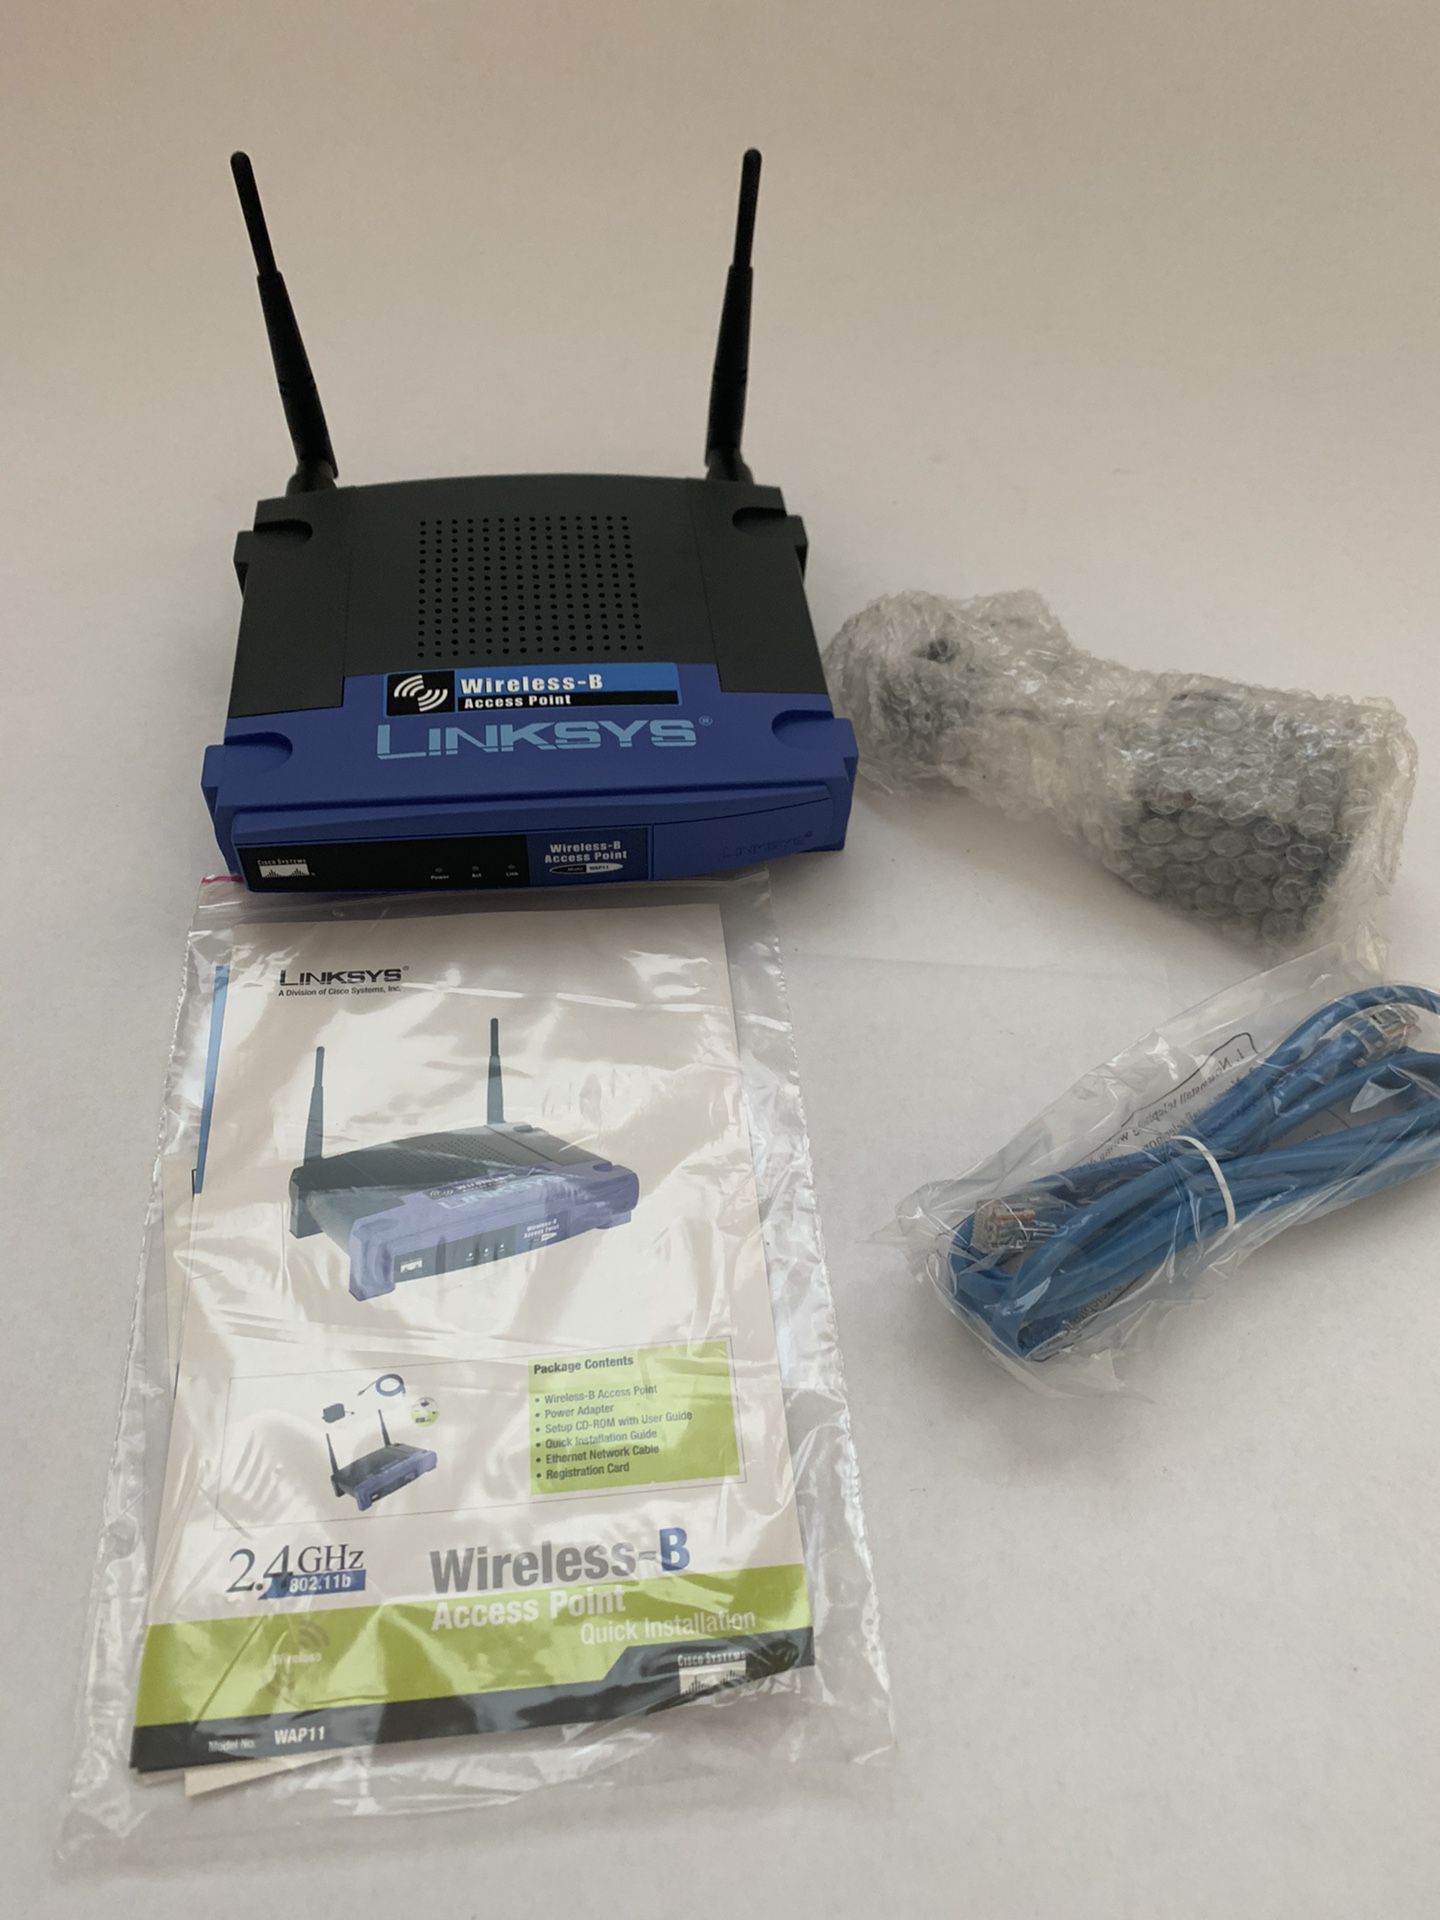 Linksys 2.4GHz 802.11b Wireless Access Point Router 4-Port Switch BEFW11S4 ver 2